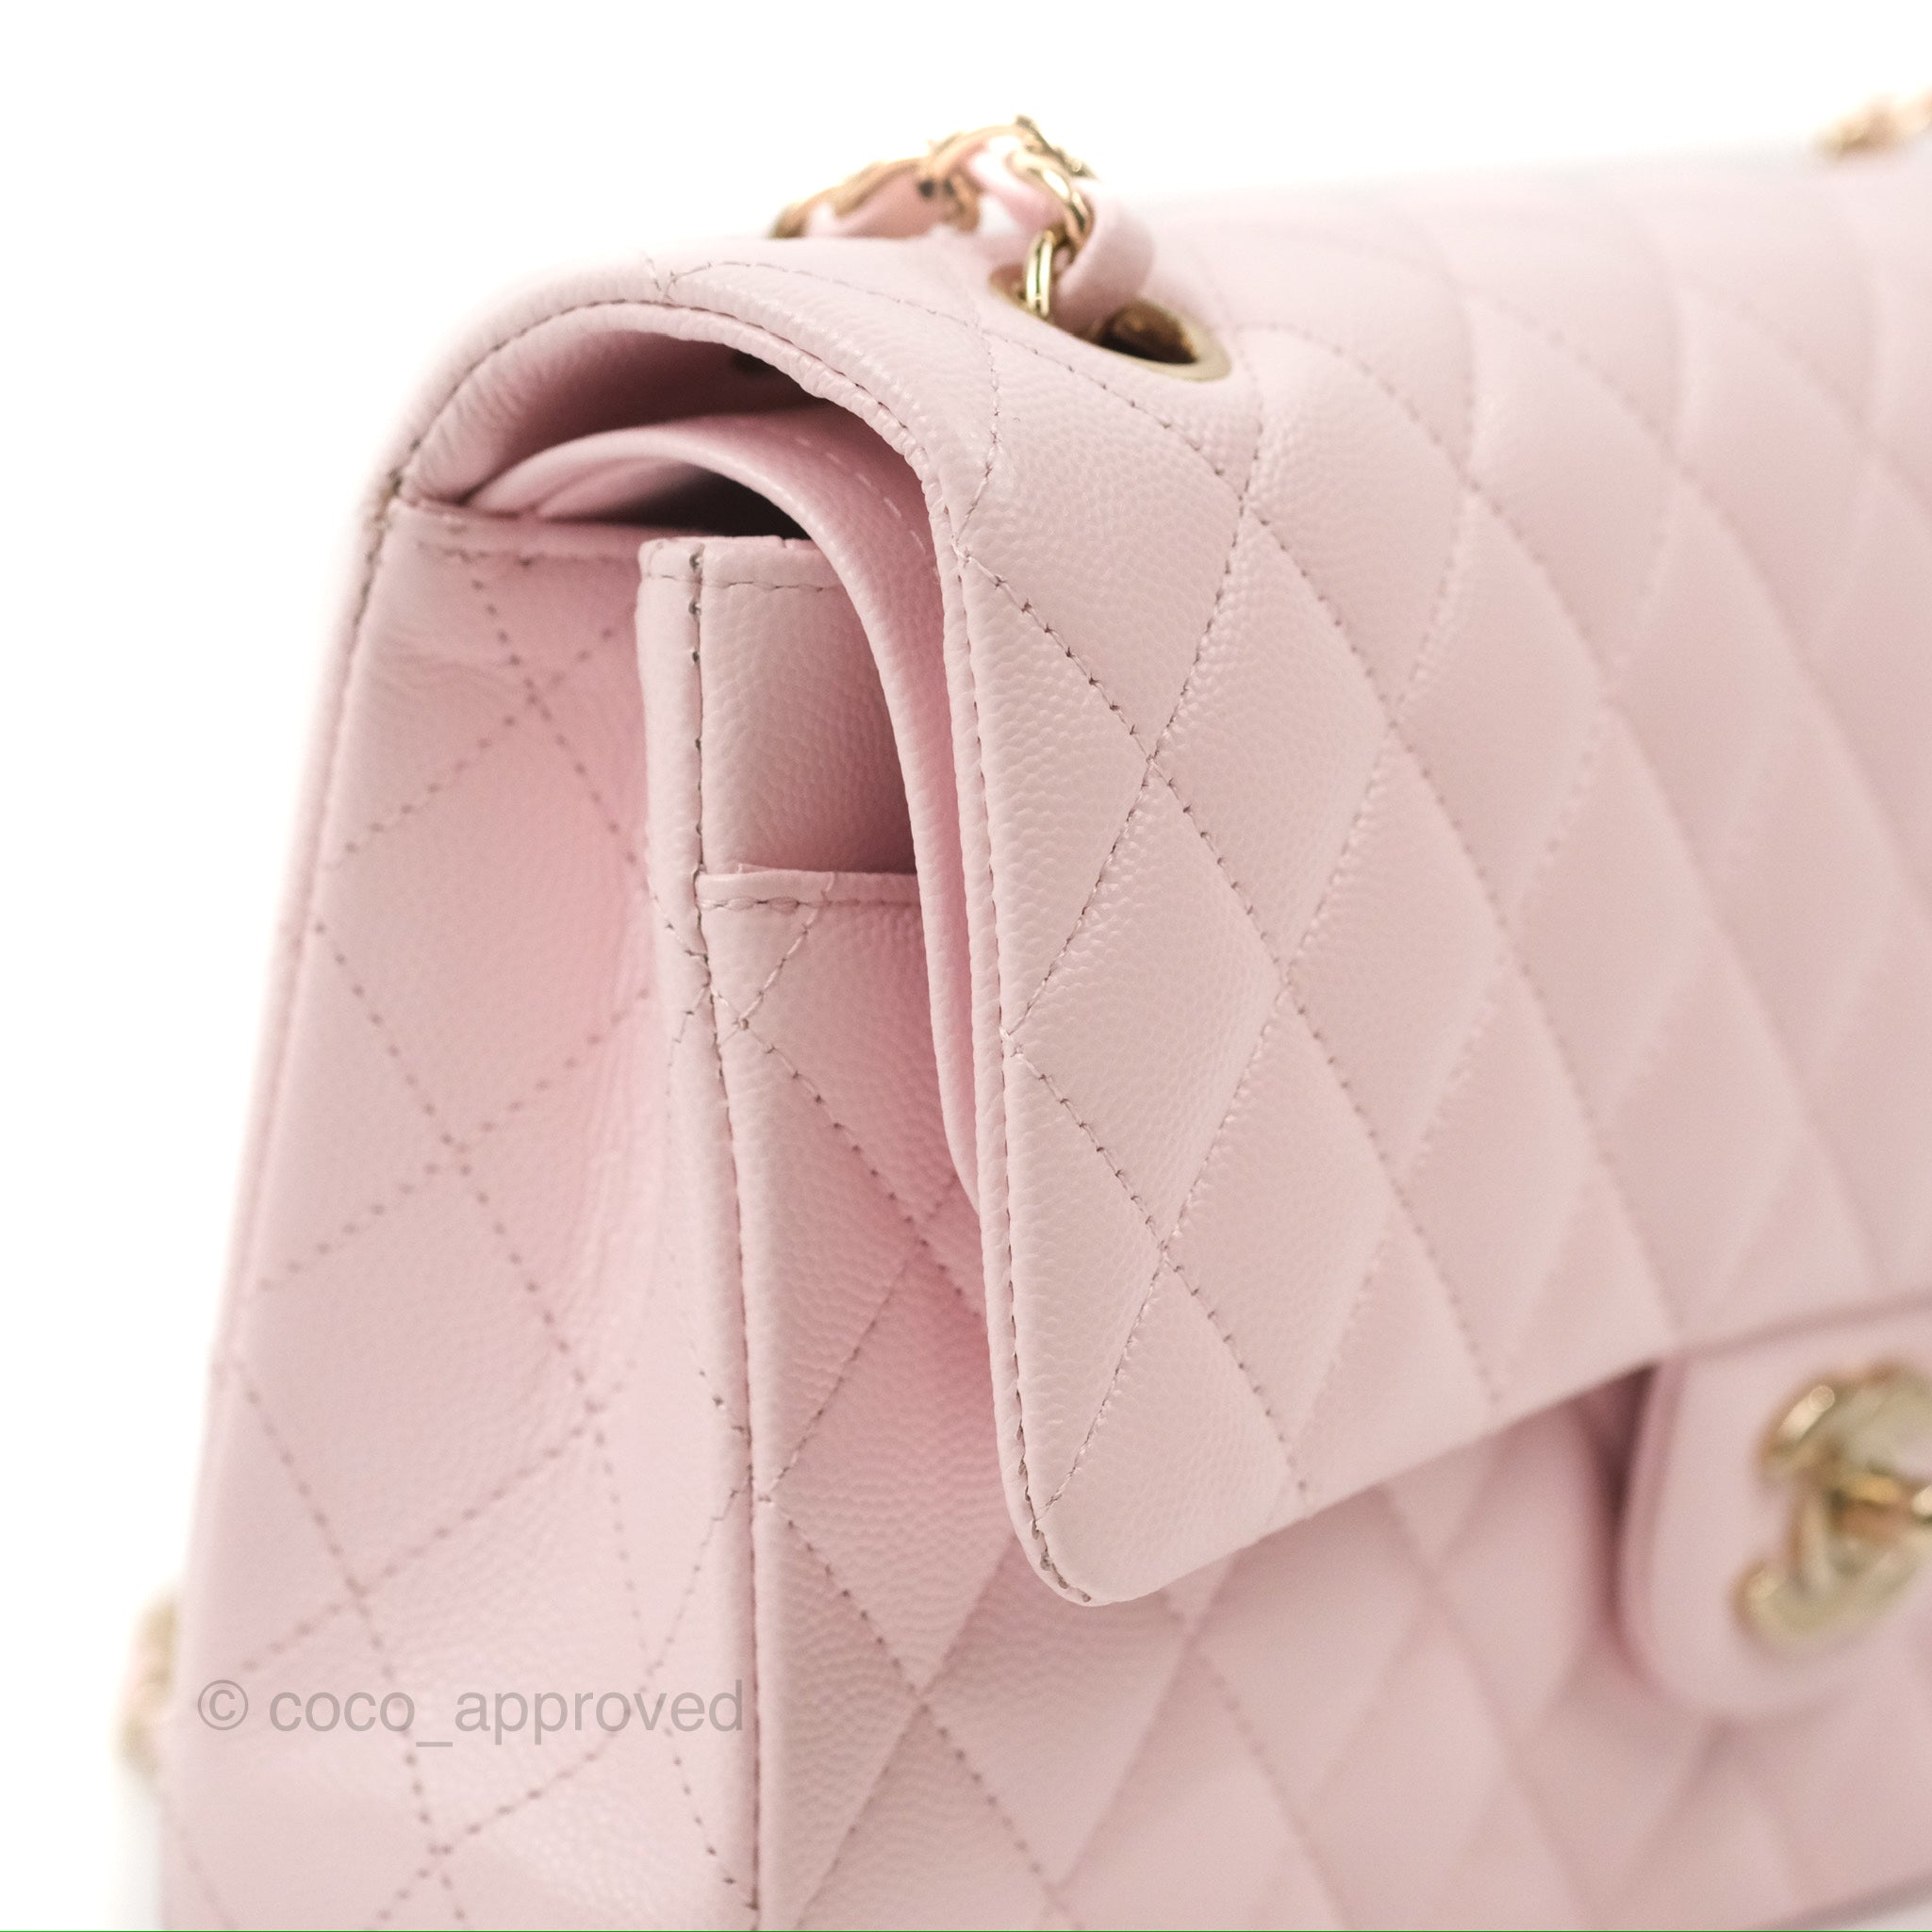 CHANEL Lambskin Quilted Medium Double Flap Light Pink | FASHIONPHILE